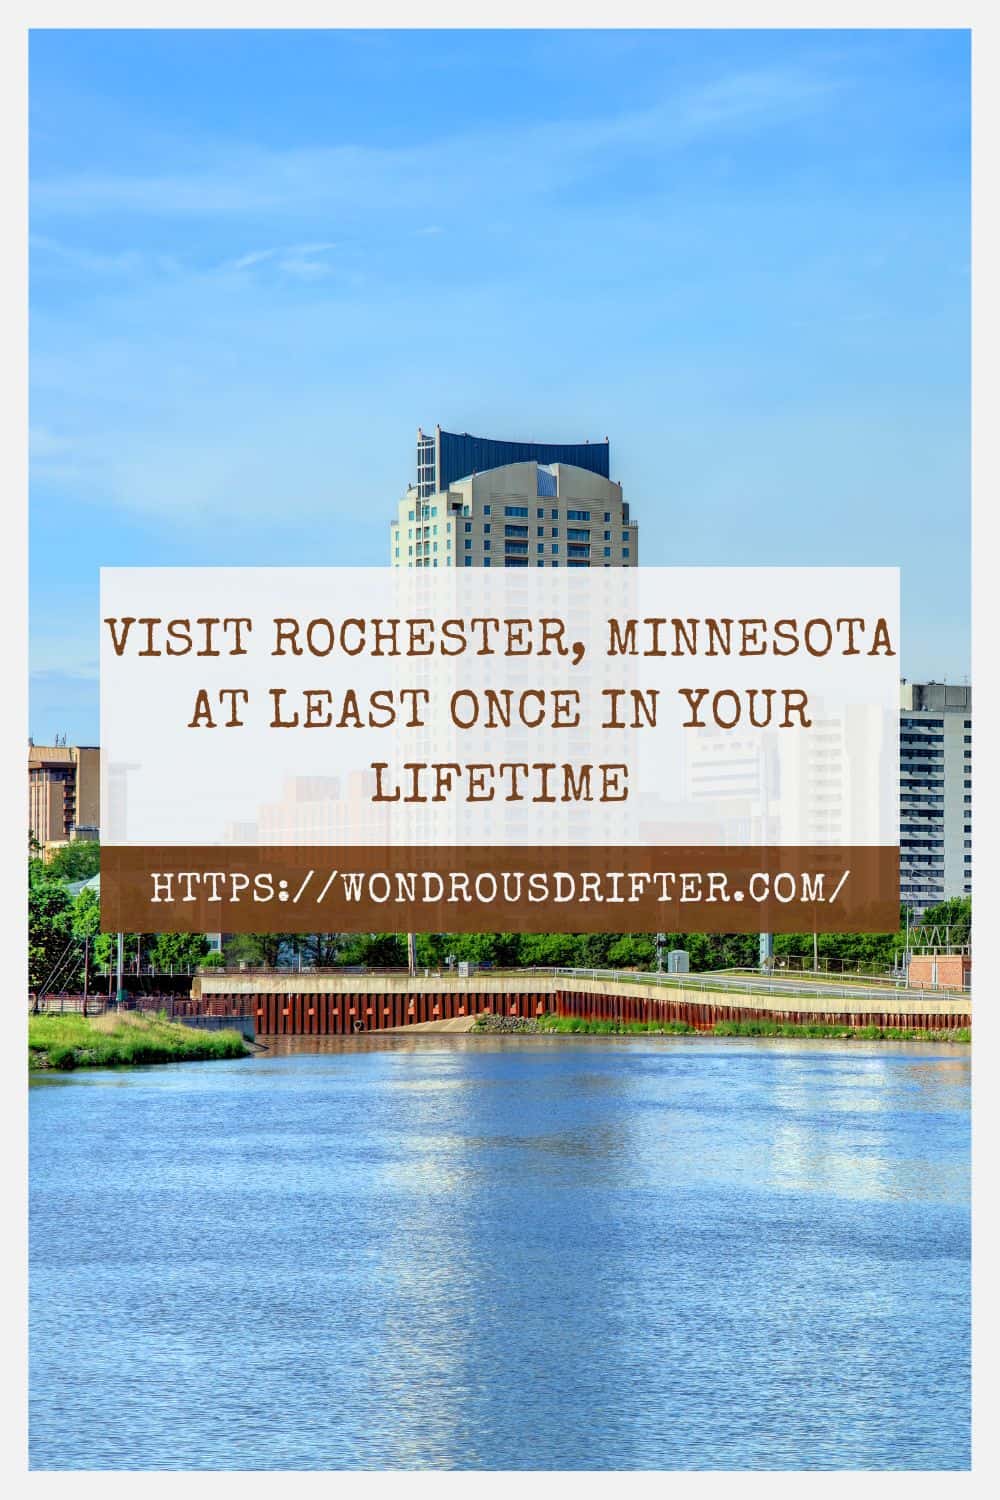 Visit Rochester Minnesota at least once in your lifetime